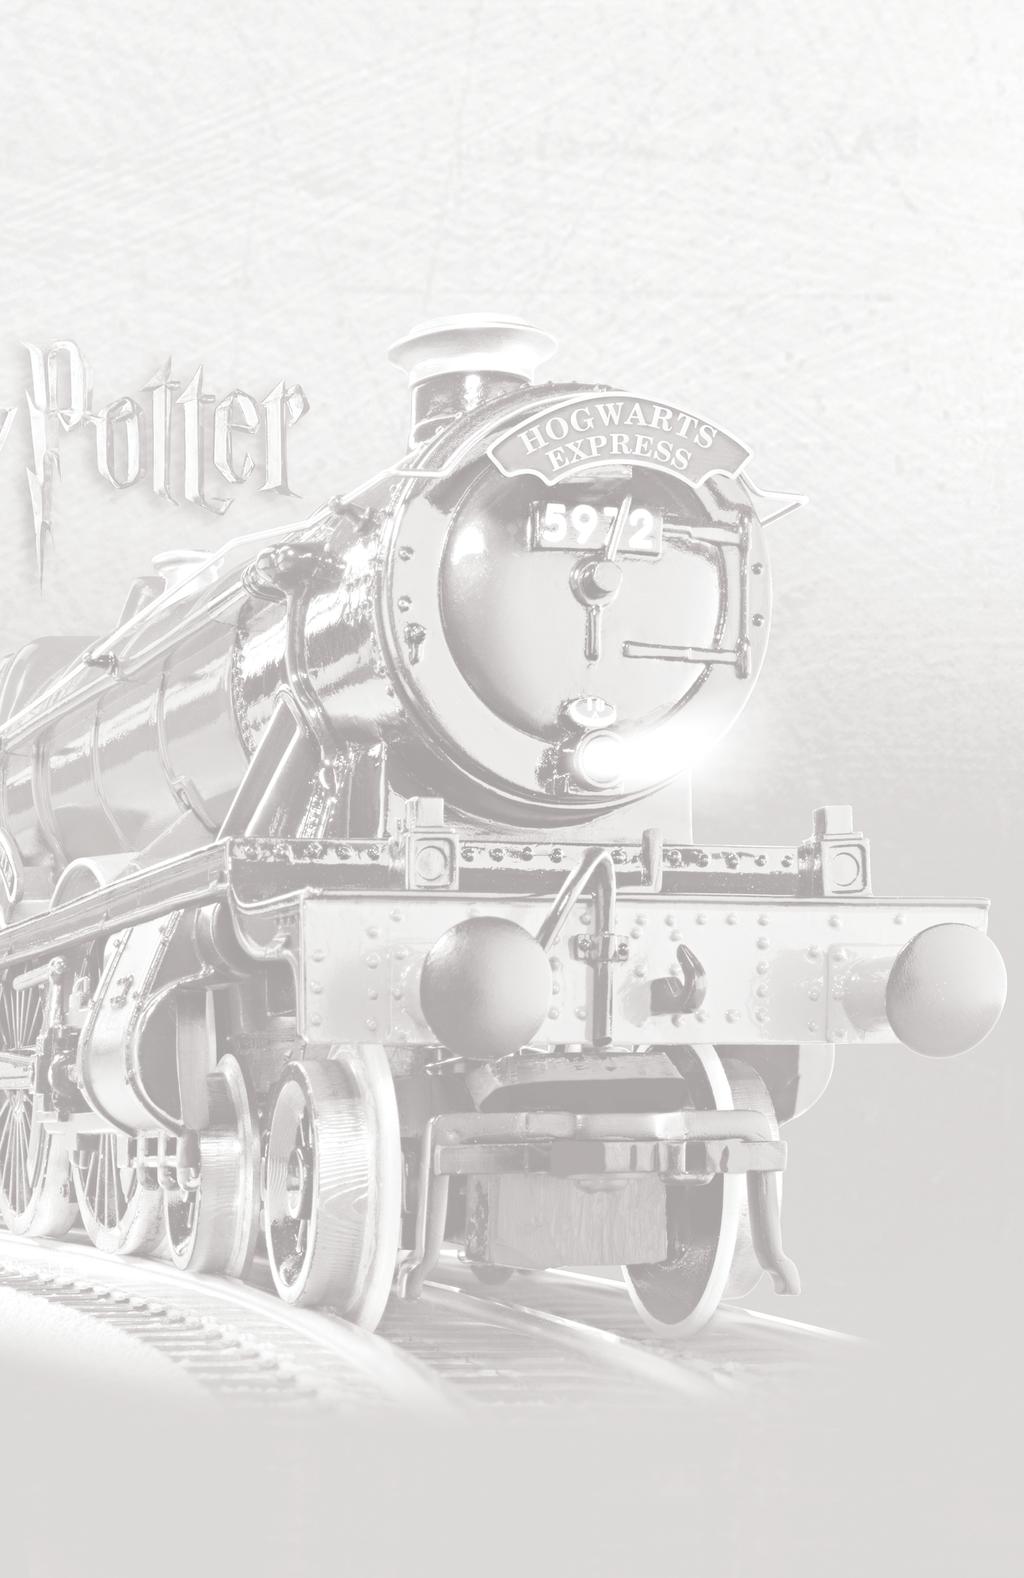 71-0020-250 Hogwarts:71-0020-250 Hogwarts 1/8/08 11:40 AM Page 1 71-0020-250 8/07 HOGWARTS EXPRESS Ready-to-Run Train Set Owner s Manual CAUTI O N ELECTRI C TOY NOT RECOMMENDED FOR CHILDREN UNDER